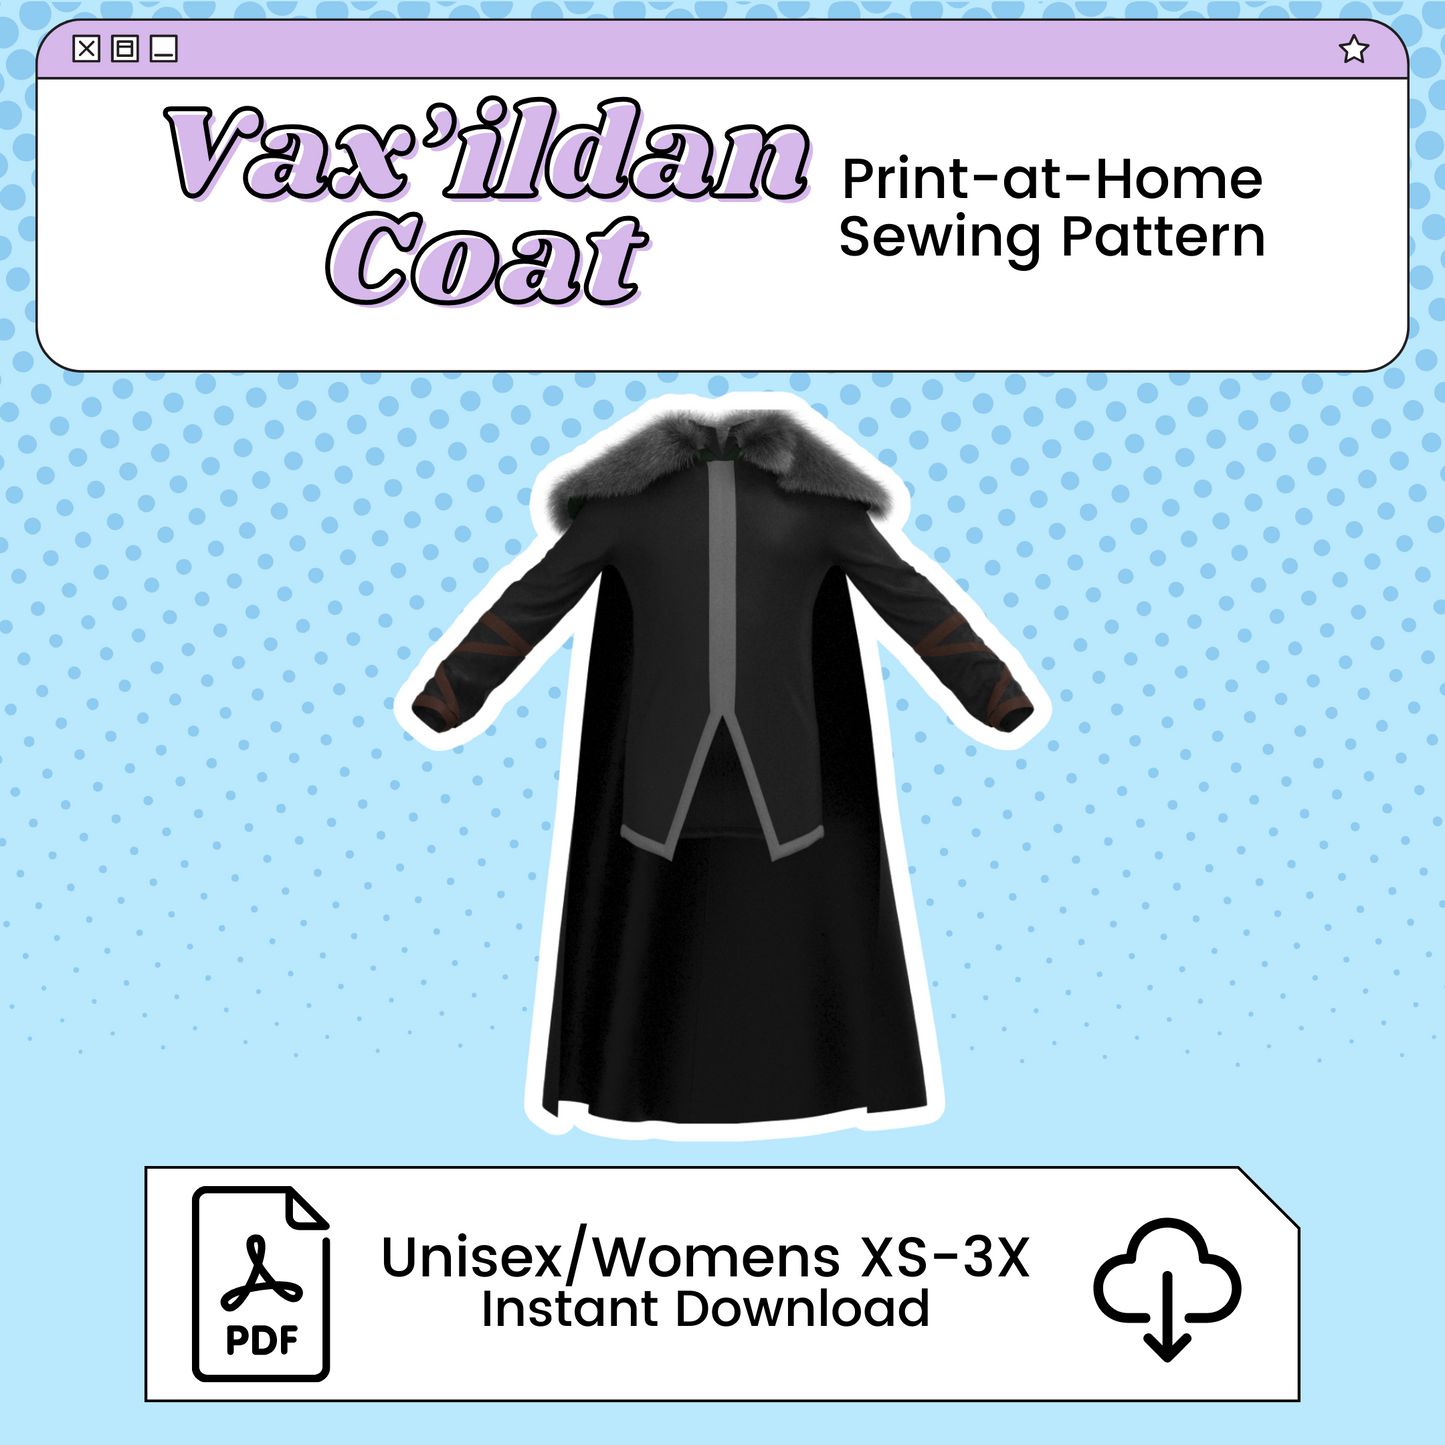 Vax'ildan Coat and Cape PDF Cosplay Pattern | Critical Role Inspired Printable Costume Pattern